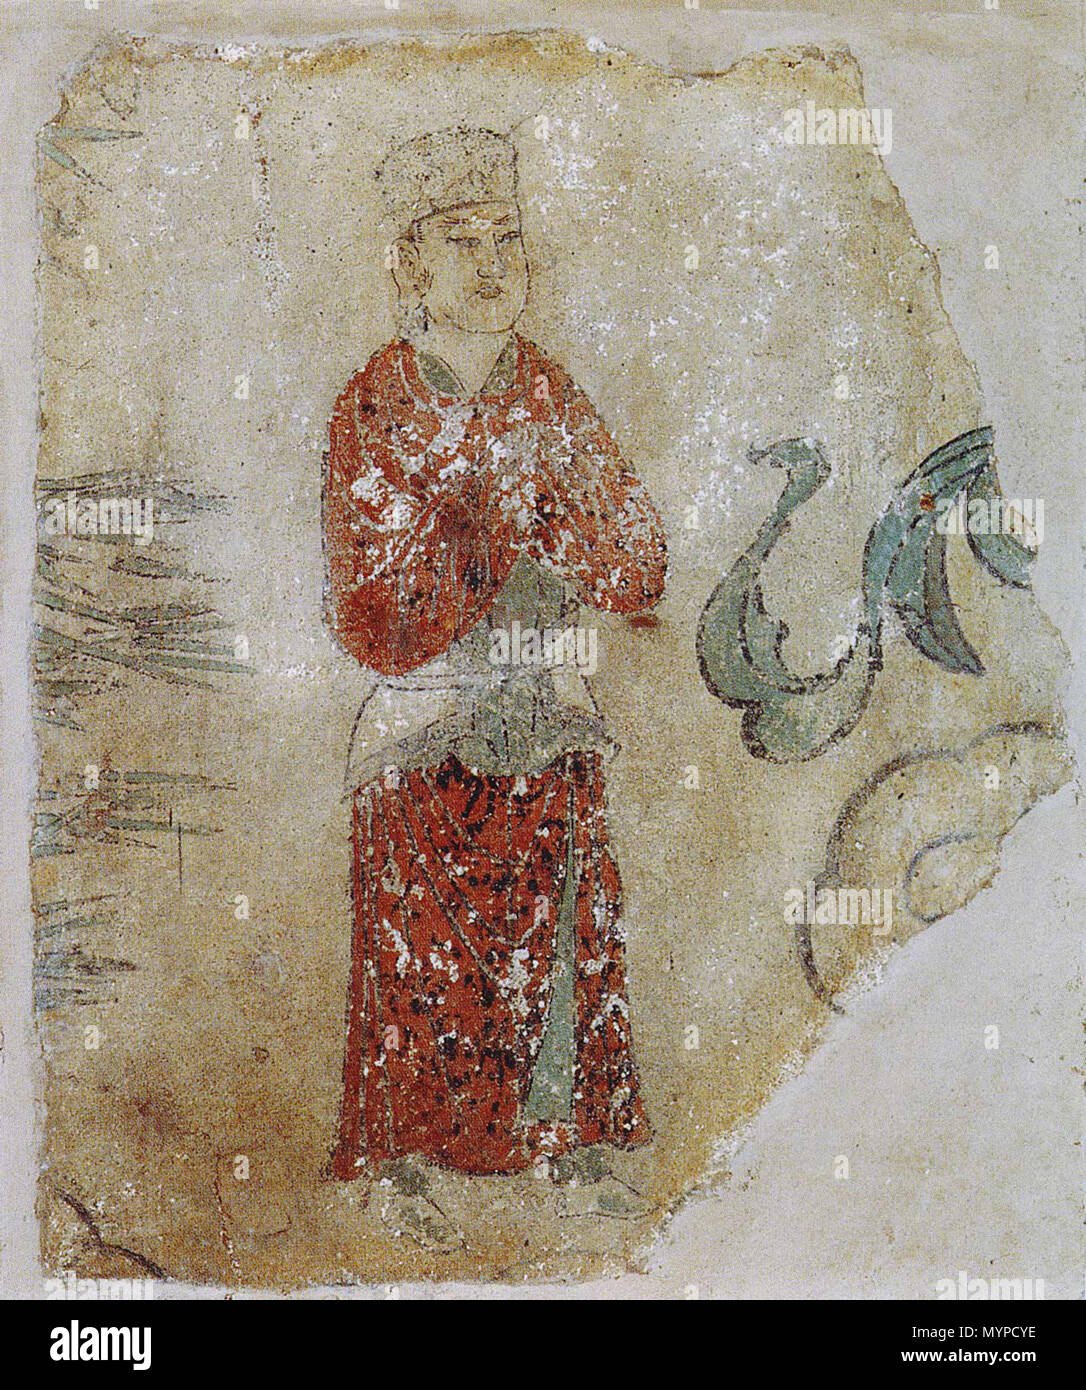 . Praying man (?), China, Gansu or Ningxia (?), 10th/11th century. Height 60 cm, width 50 cm. Fragment of a wall painting. Musée national des arts asiatiques - Guimet, Paris, Inv. no. MA 480. If one accepts that the painting is from Ningxia or Gansu, the man might be a Tangut. 10th/11th century. unknown / (of the reproduction) Musée national des arts asiatiques - Guimet, Paris 436 PrayingTangutMan Stock Photo